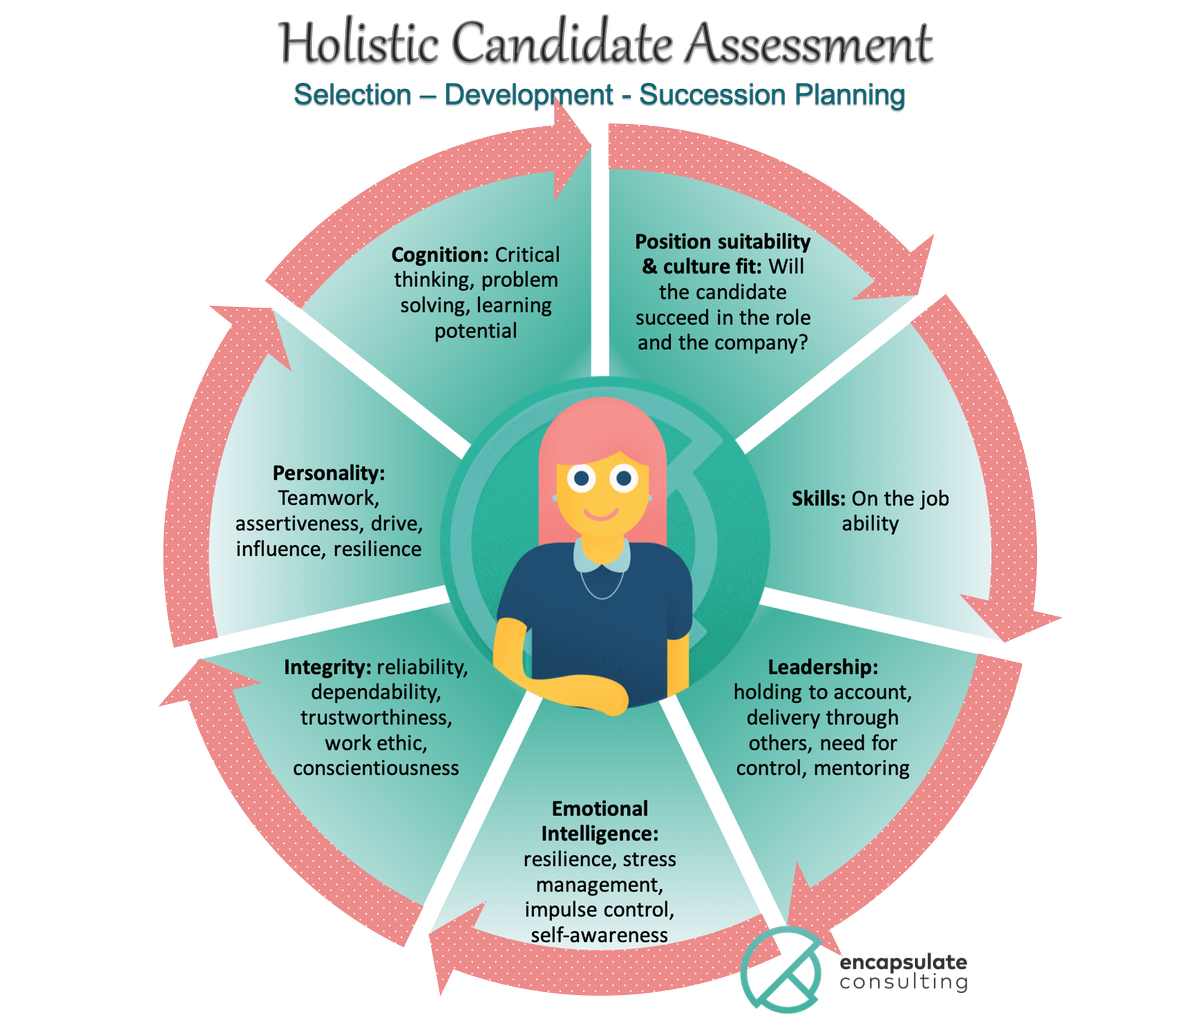 Holistic talent assessments present the full candidate picture based on evidence rather than the gut feeling
#PsychometricAssessment 
#CompetencyBasedAssessment 
#HolisticAssessment #IntegrityAssessment 
#PersonalityAssessment
#EQAssessment  
linkedin.com/pulse/value-ho…